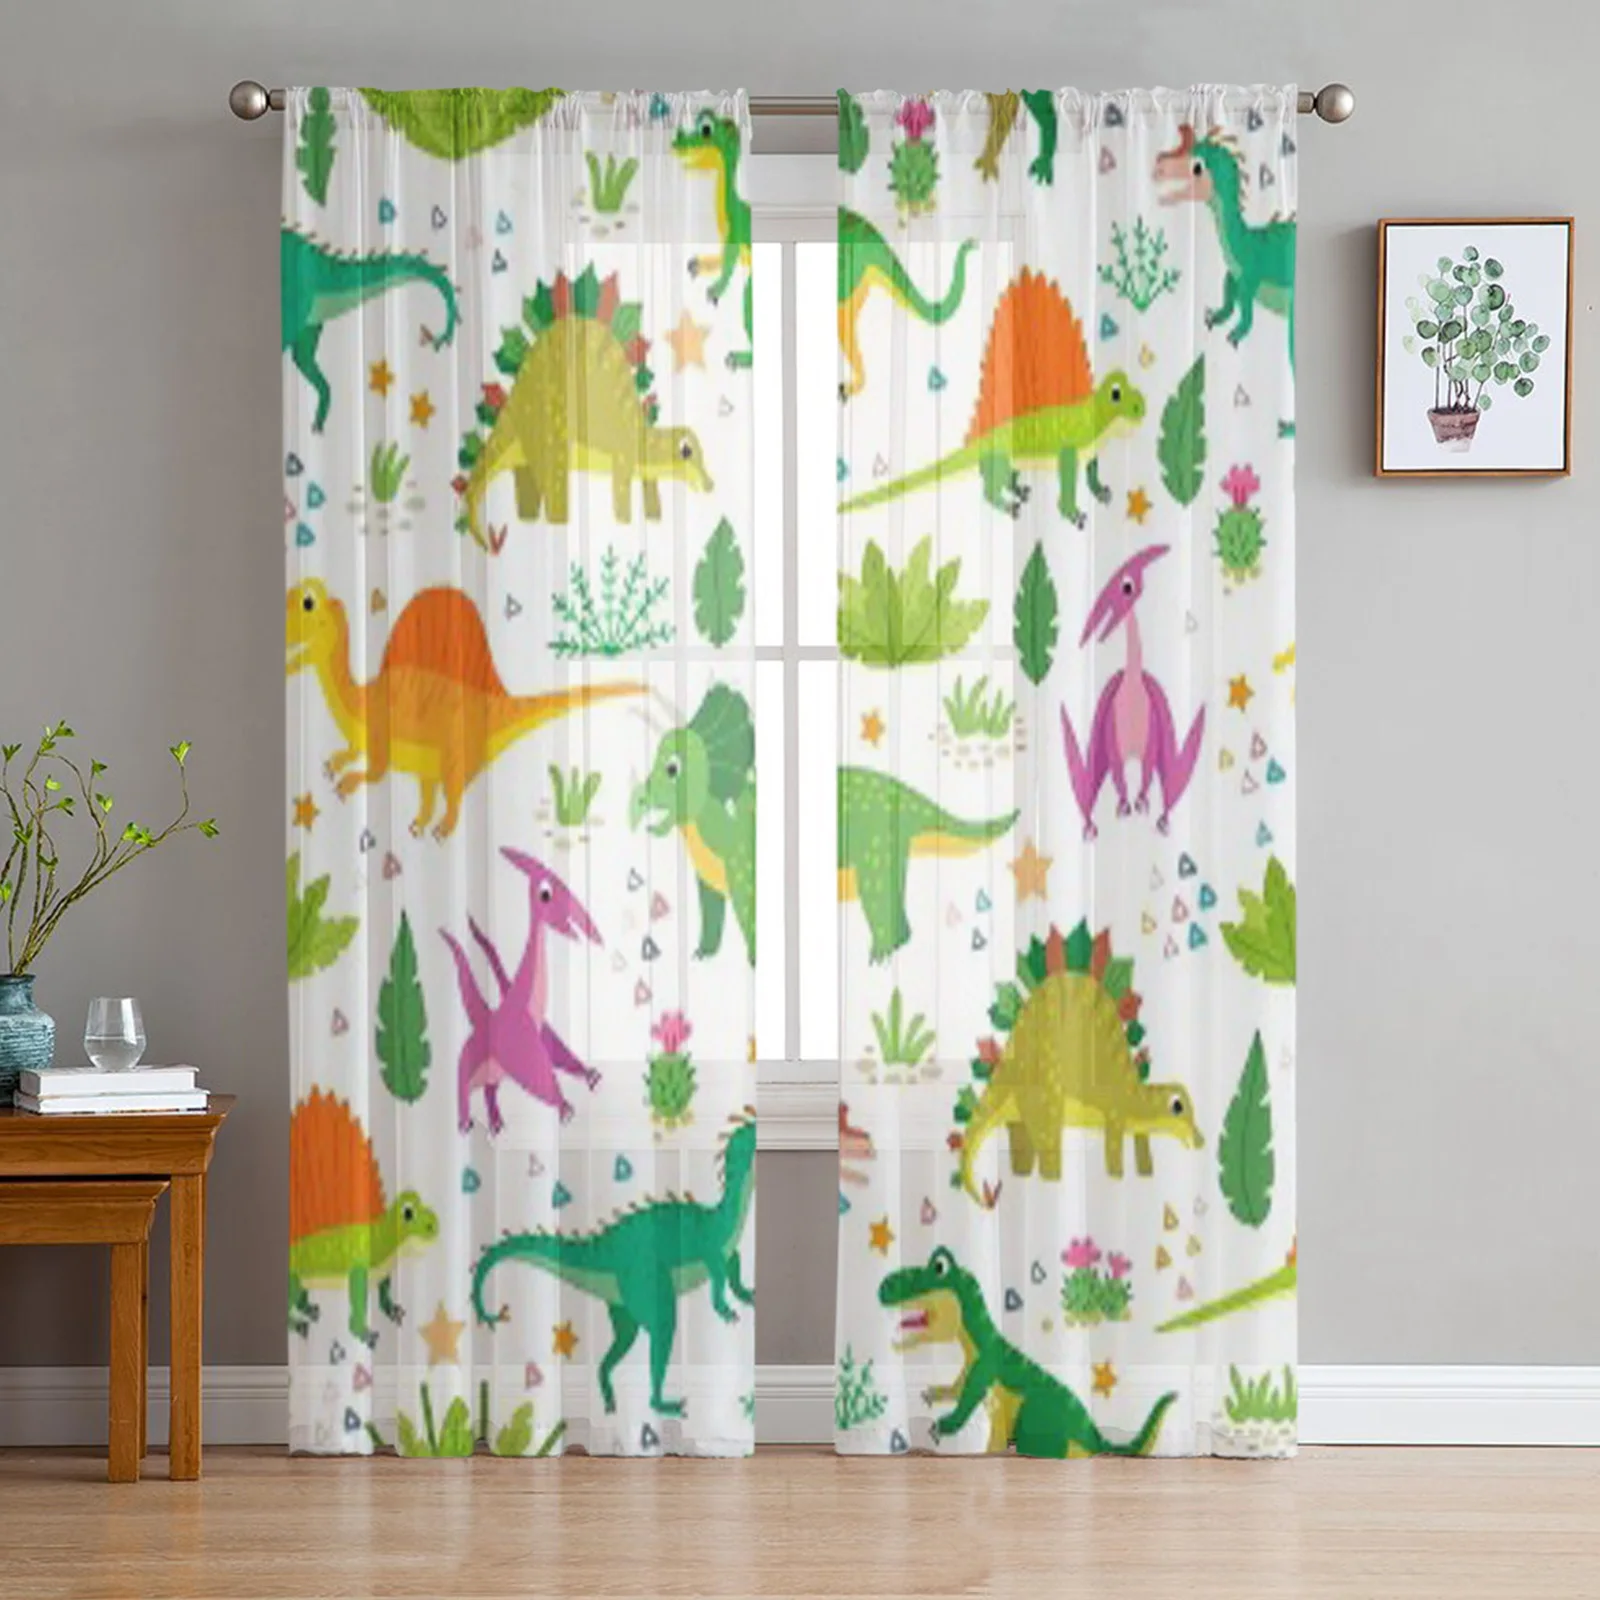 

Childish Dinosaurs Tropical Leaves Tulle Sheer Curtains for Living Room Bedroom Kitchen Decoration Voile Organza Curtains